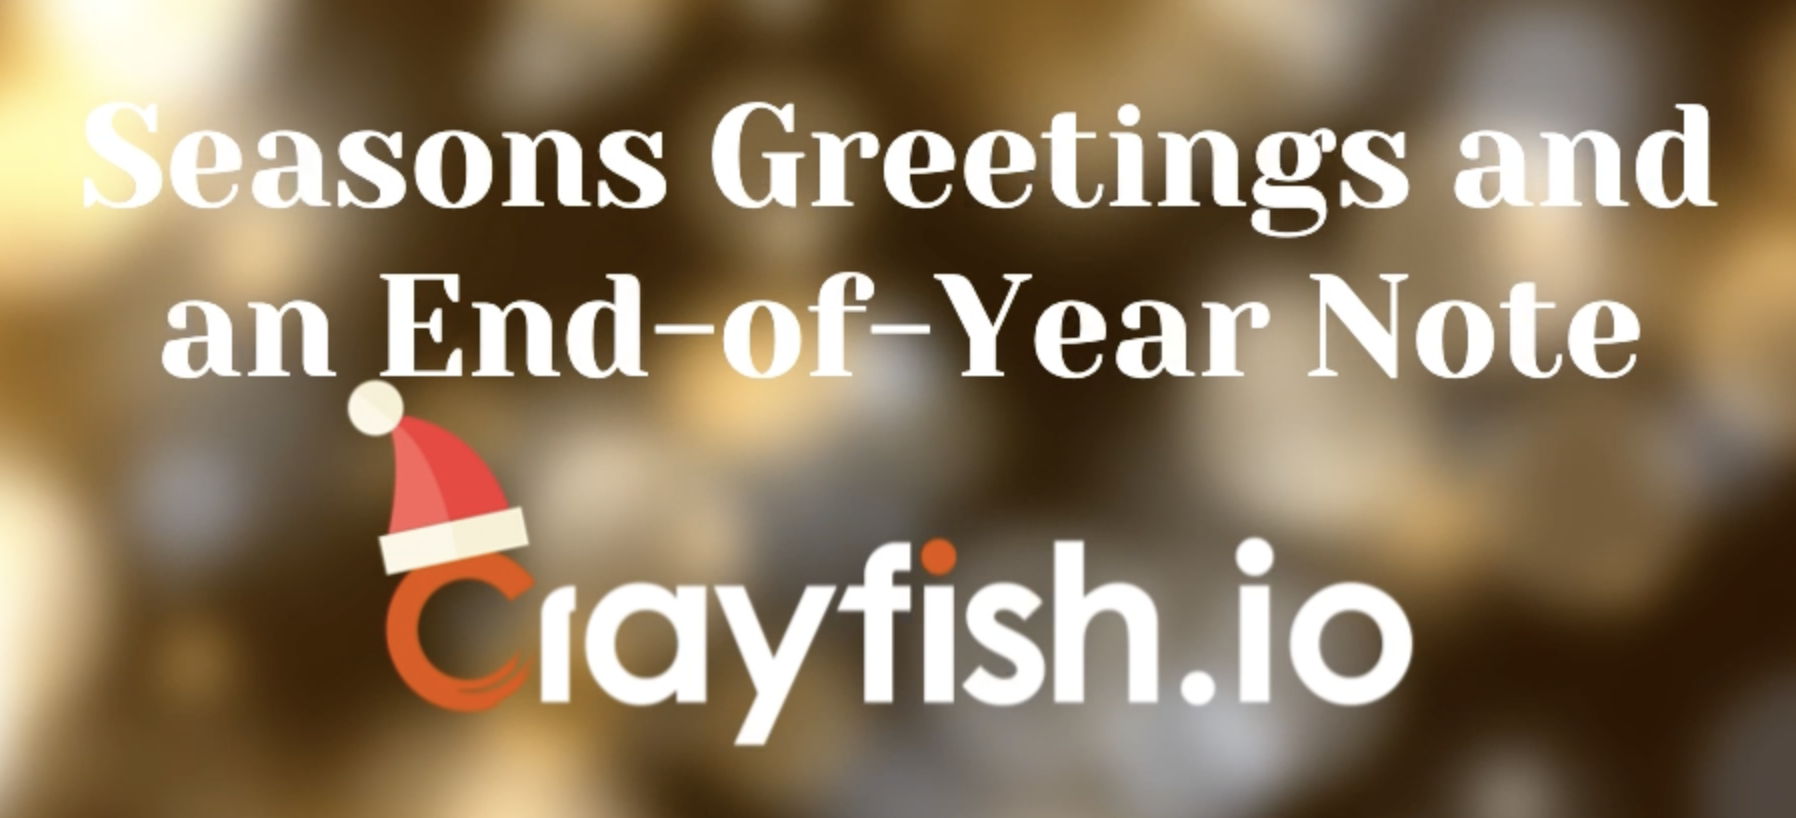 Seasons Greetings and an End-of-Year Note from Crayfish.io